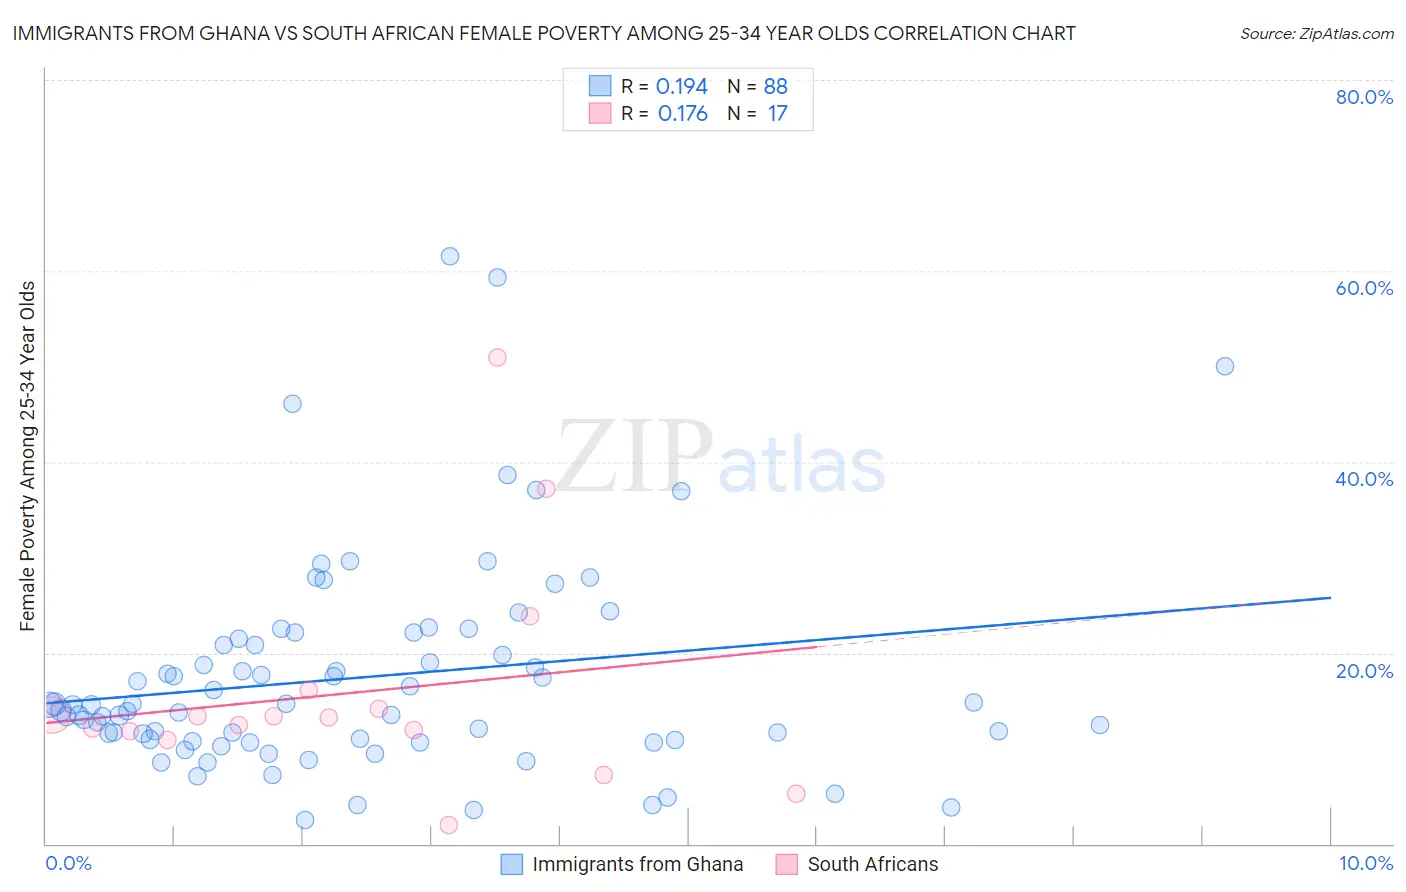 Immigrants from Ghana vs South African Female Poverty Among 25-34 Year Olds